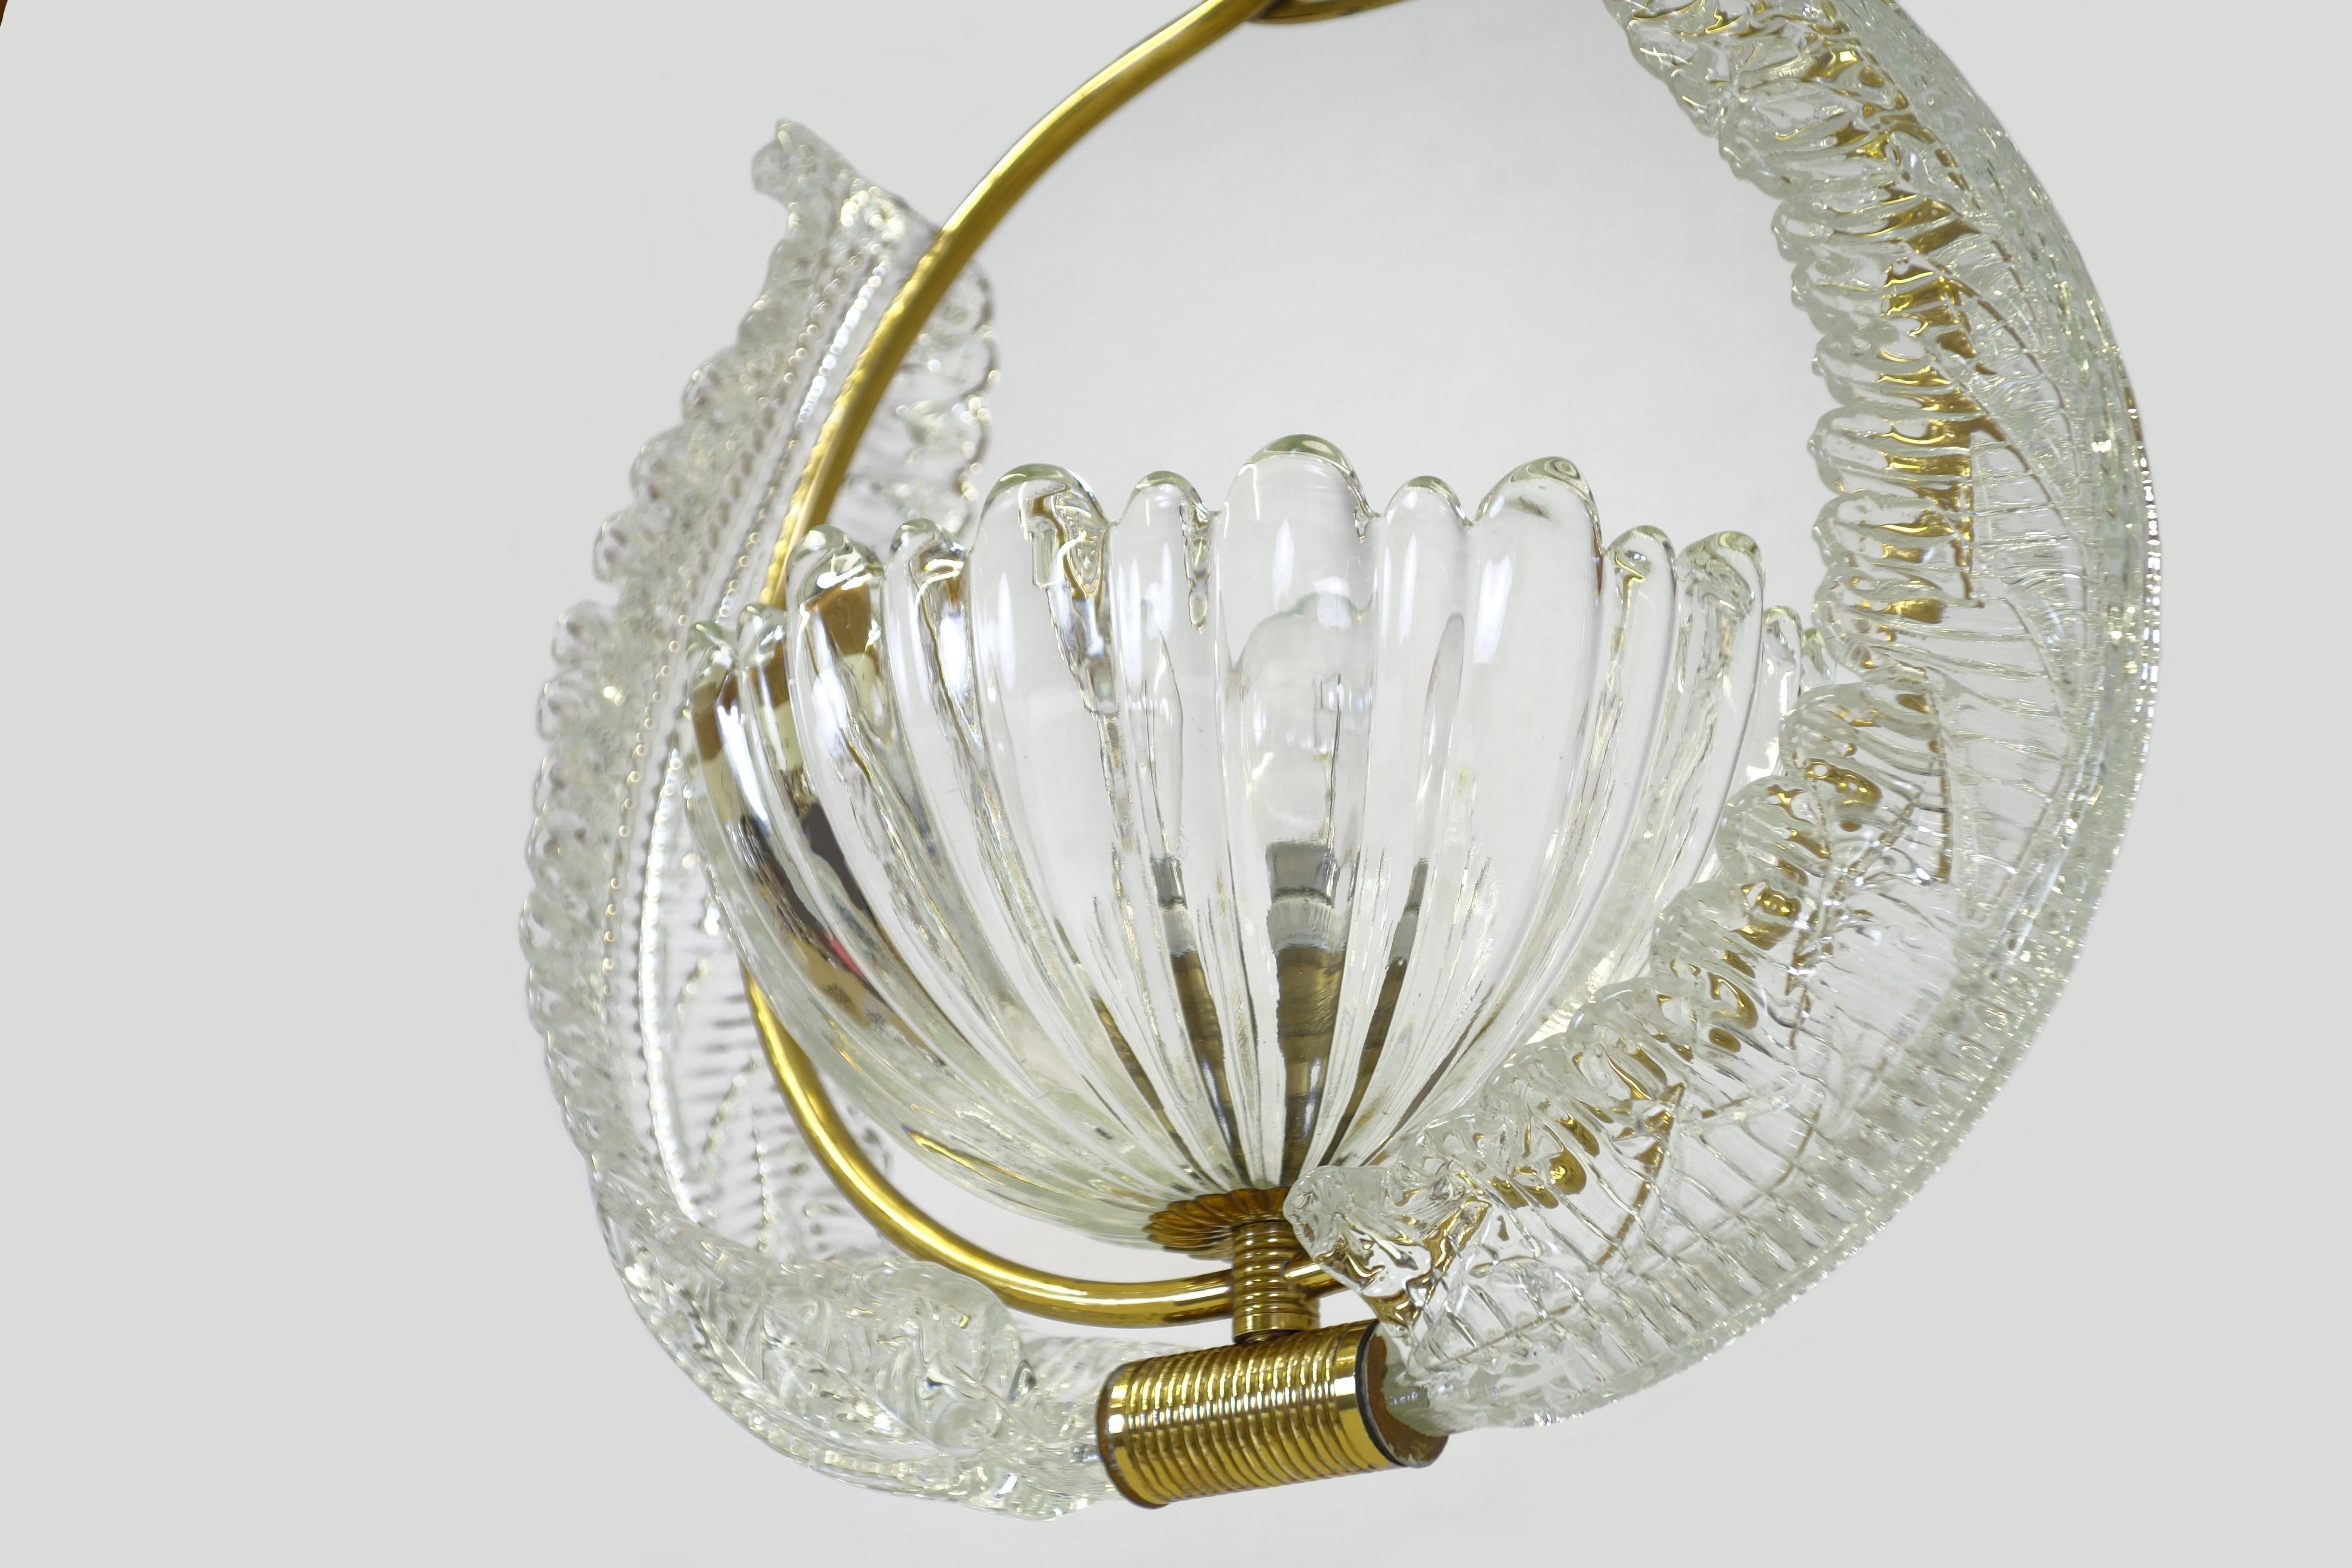 Enchanting little pendant lamp with glass leaves a centered cup and rich details by Barovier and Toso.